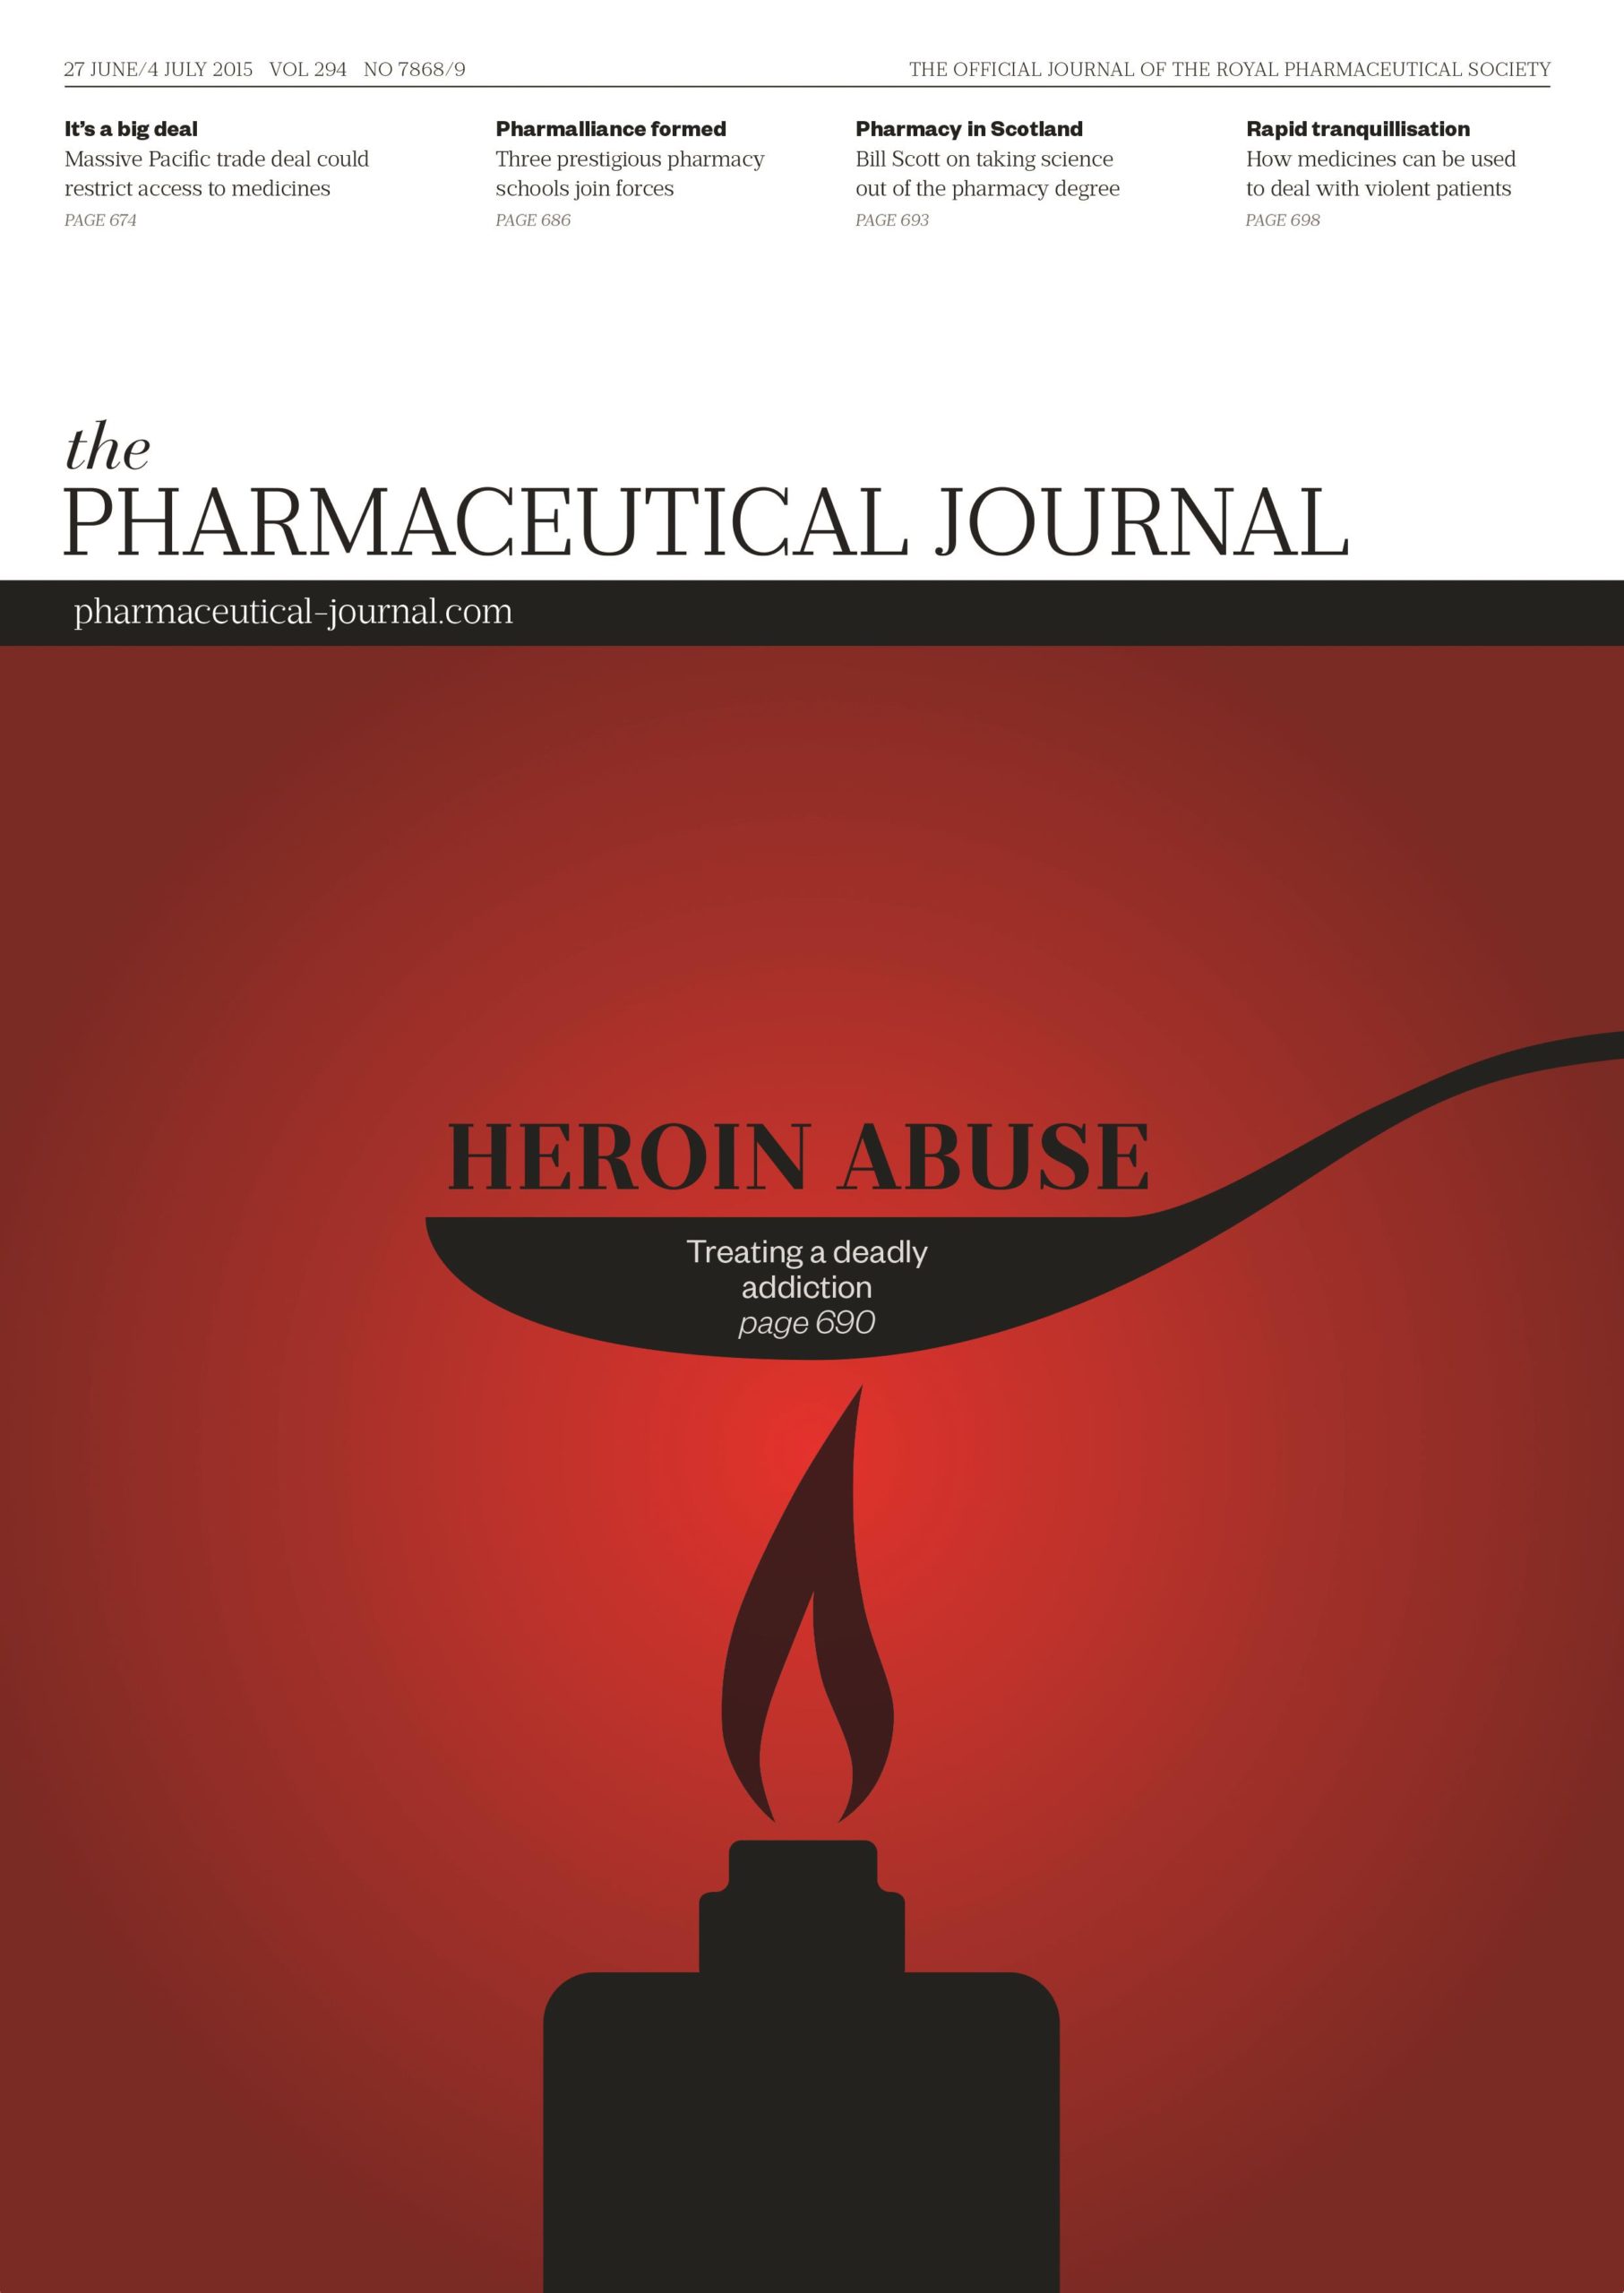 Publication issue cover for PJ, 27 June/4 July 2015, Vol 294, No 7868/9